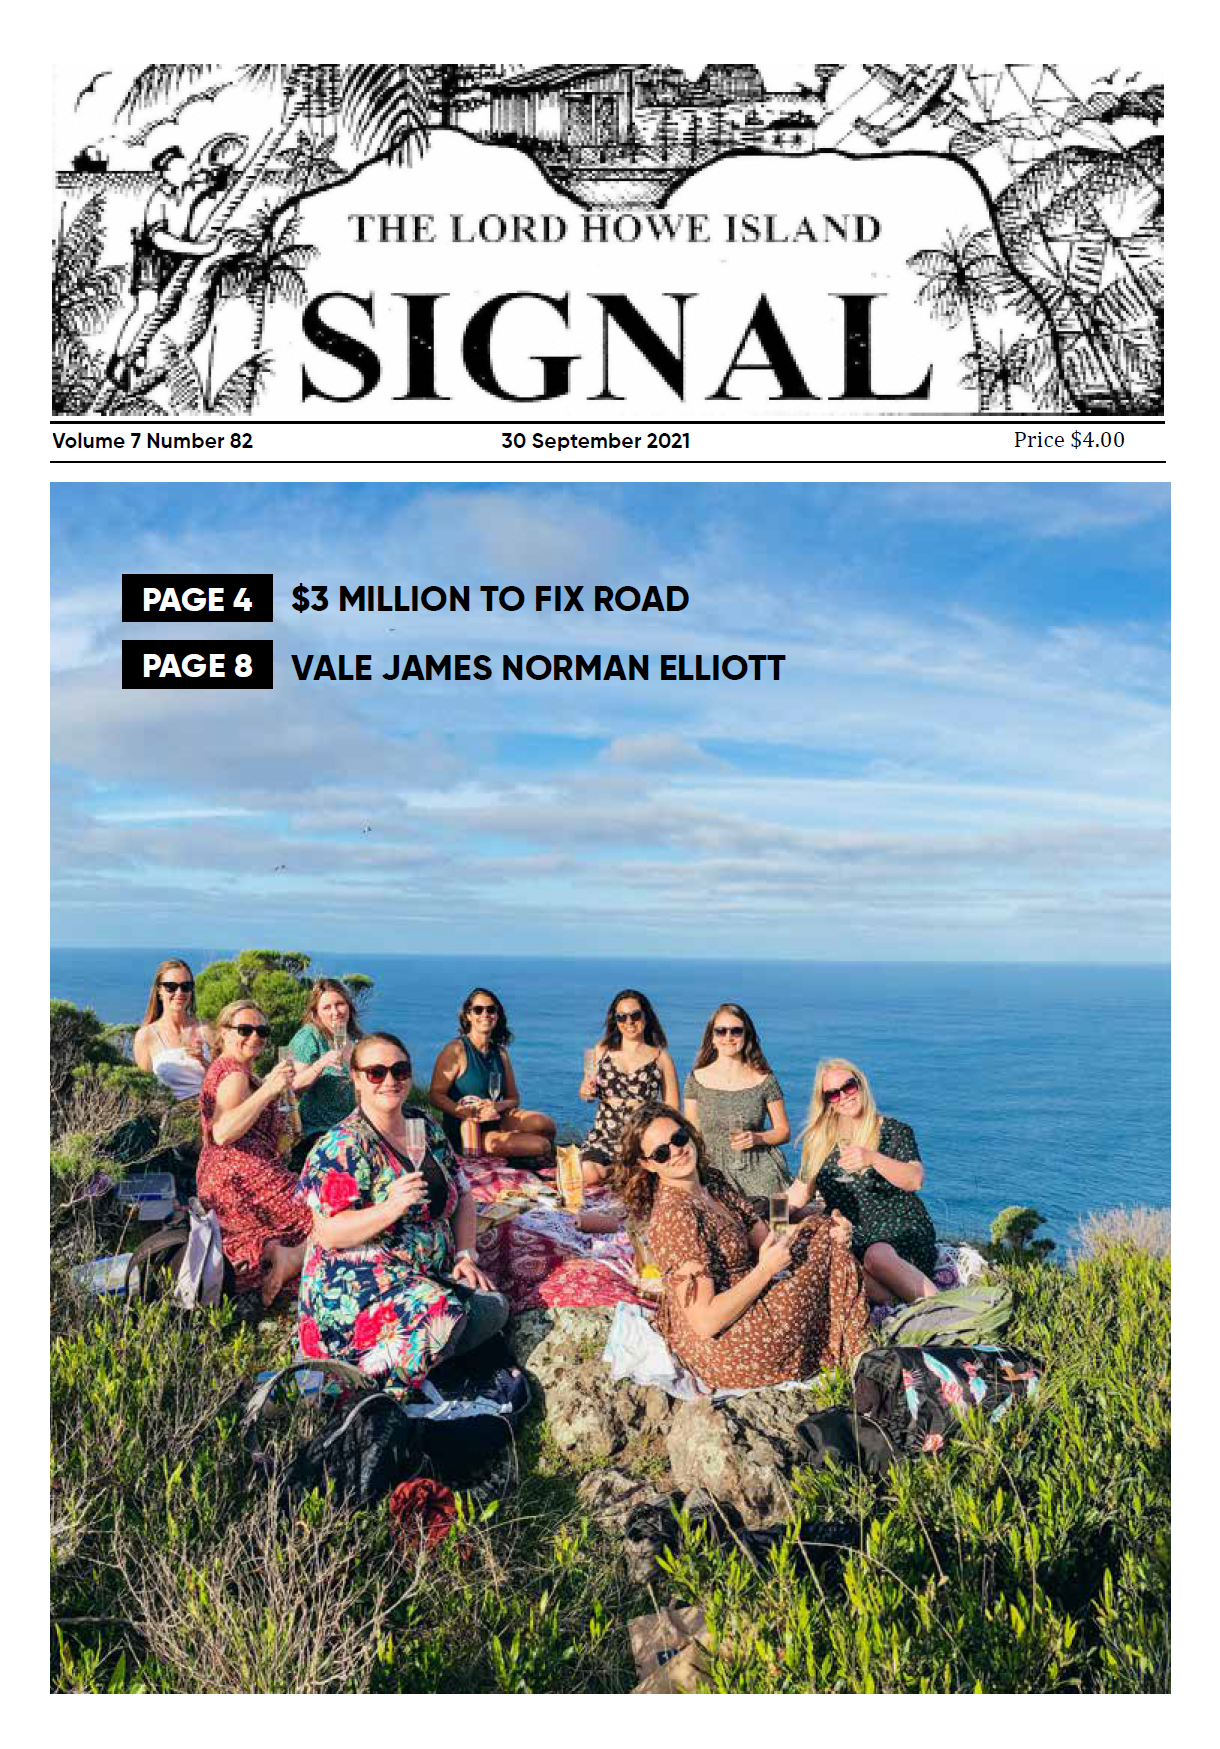 The Lord Howe Island Signal 30 September 2021